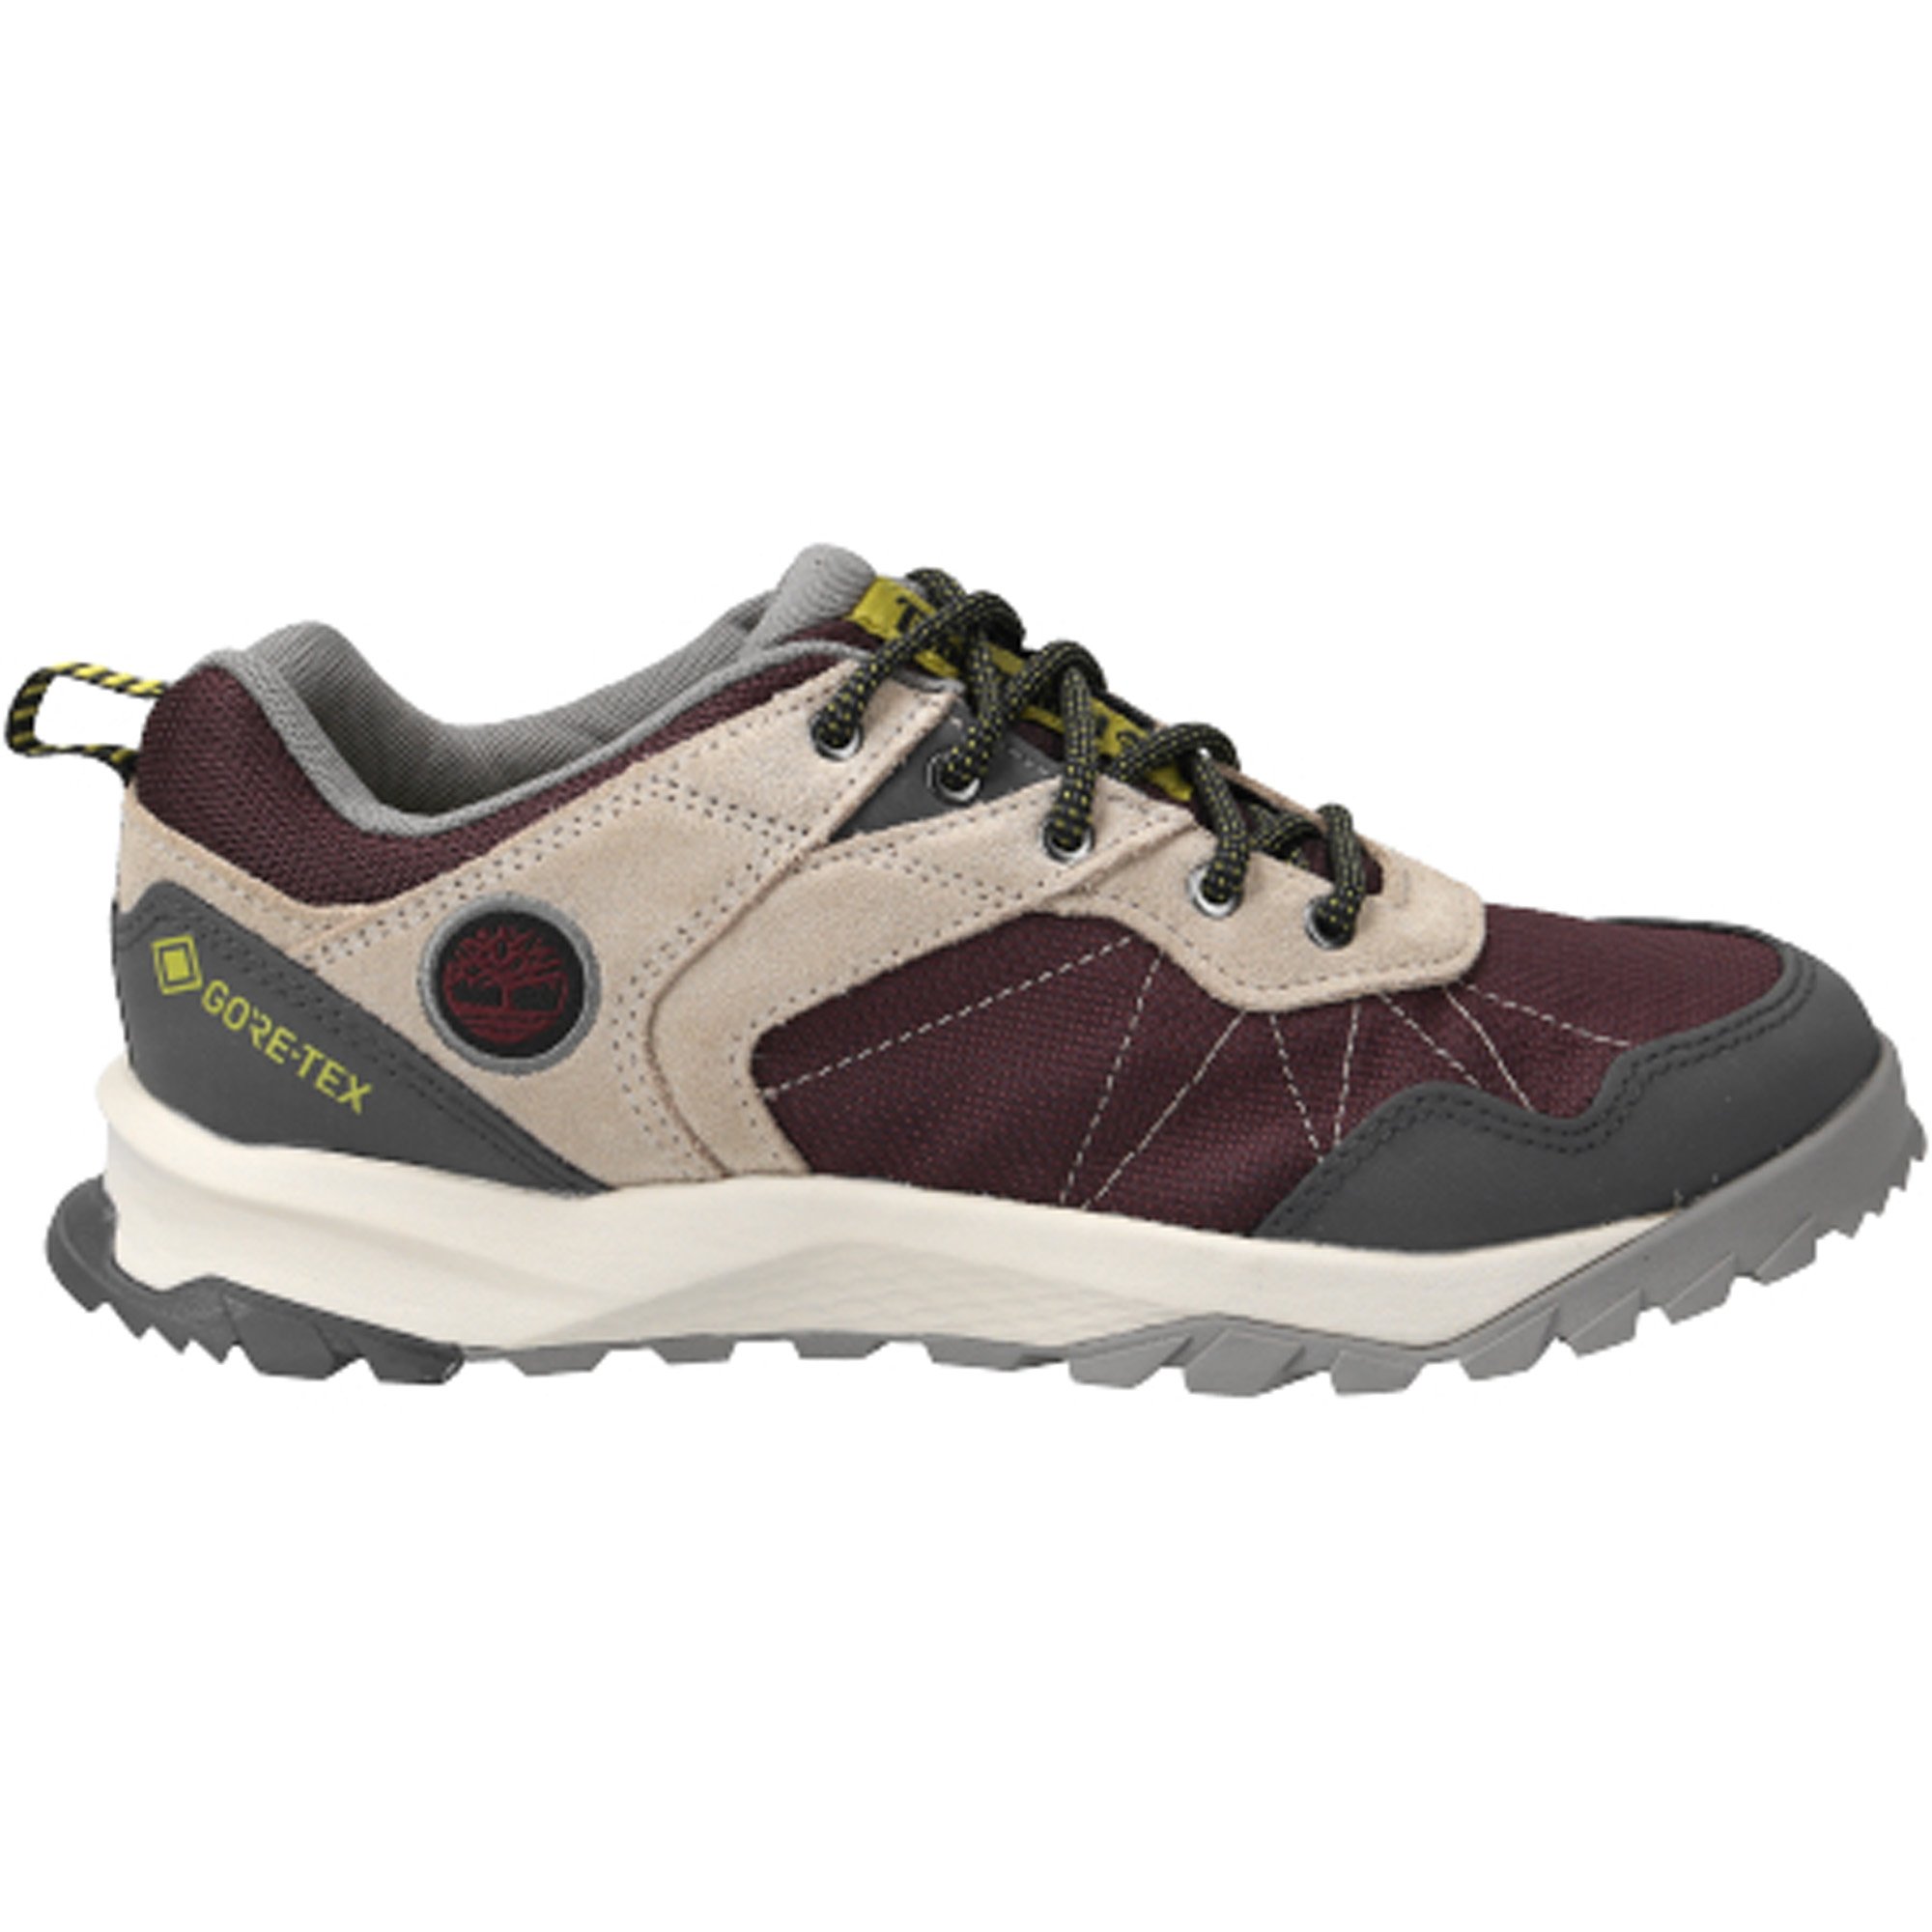 Timberland Lincoln Peak Low GTX Women's Hiking Shoes